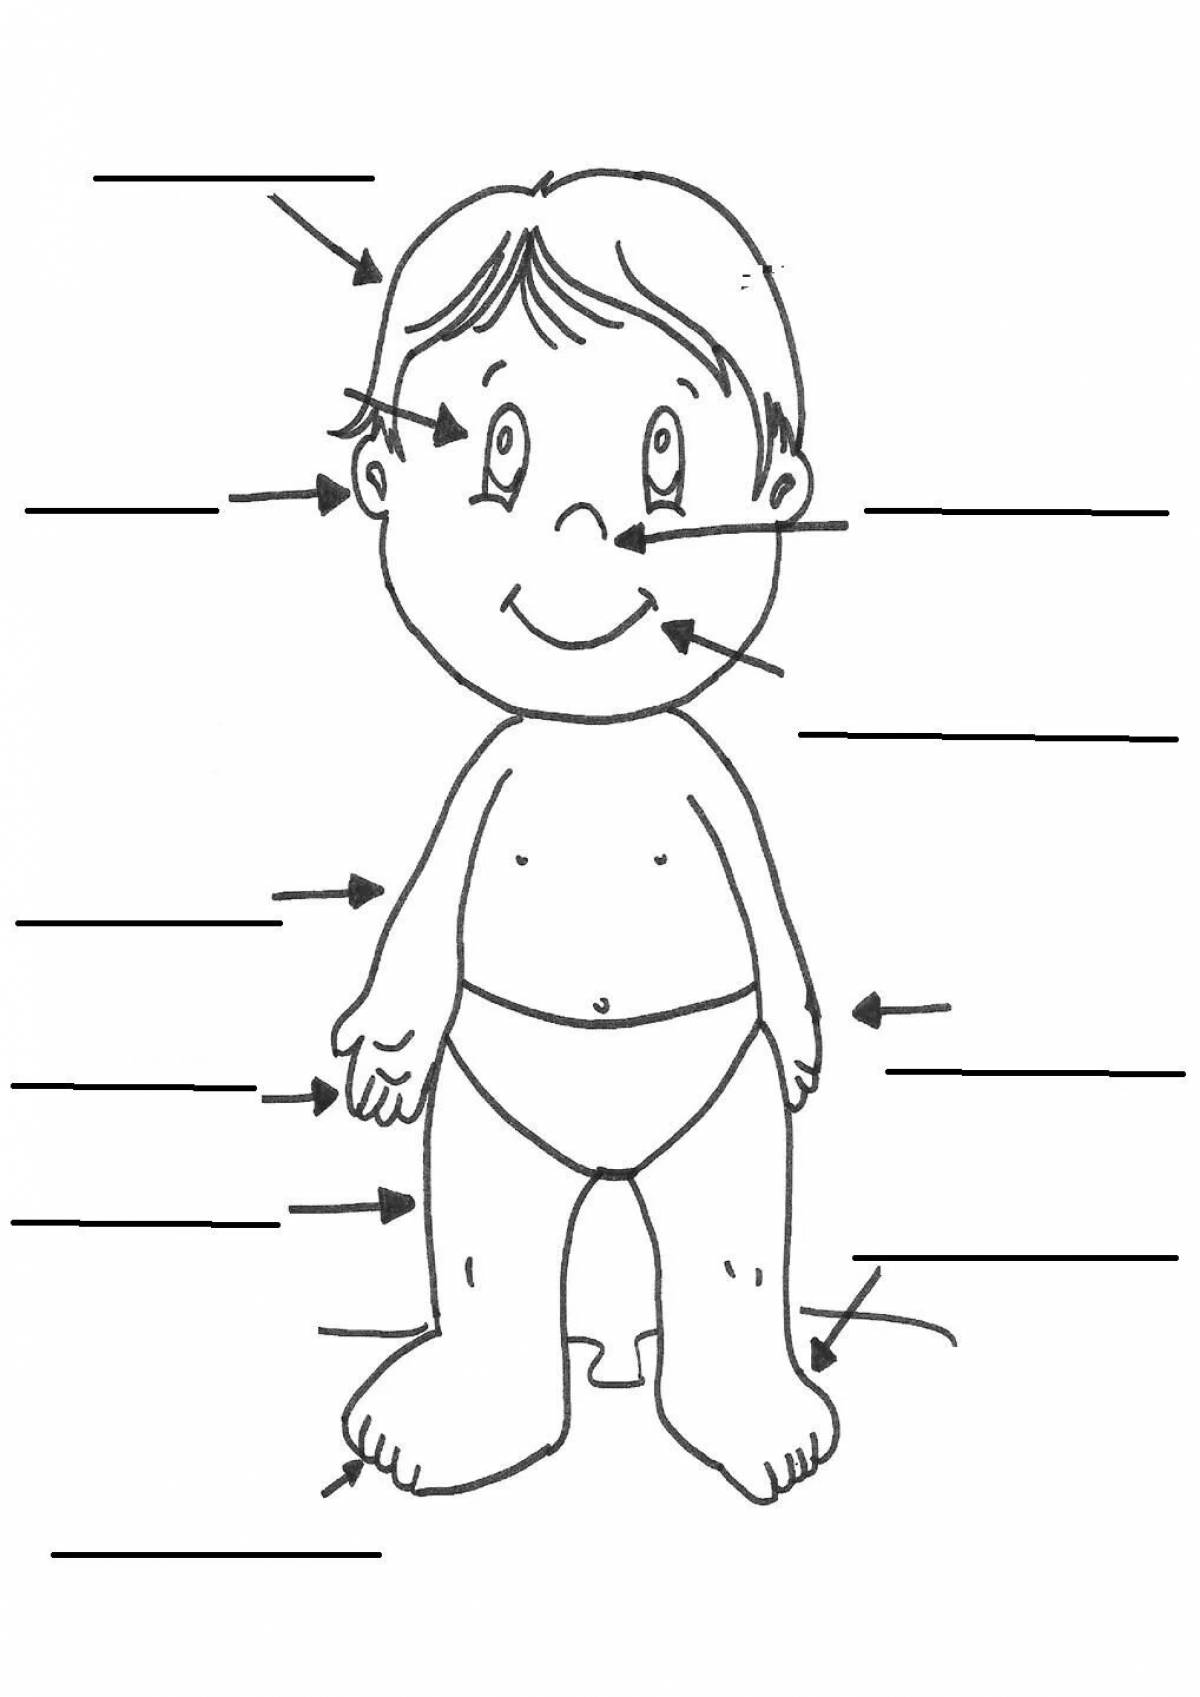 Creative human body coloring page for kids